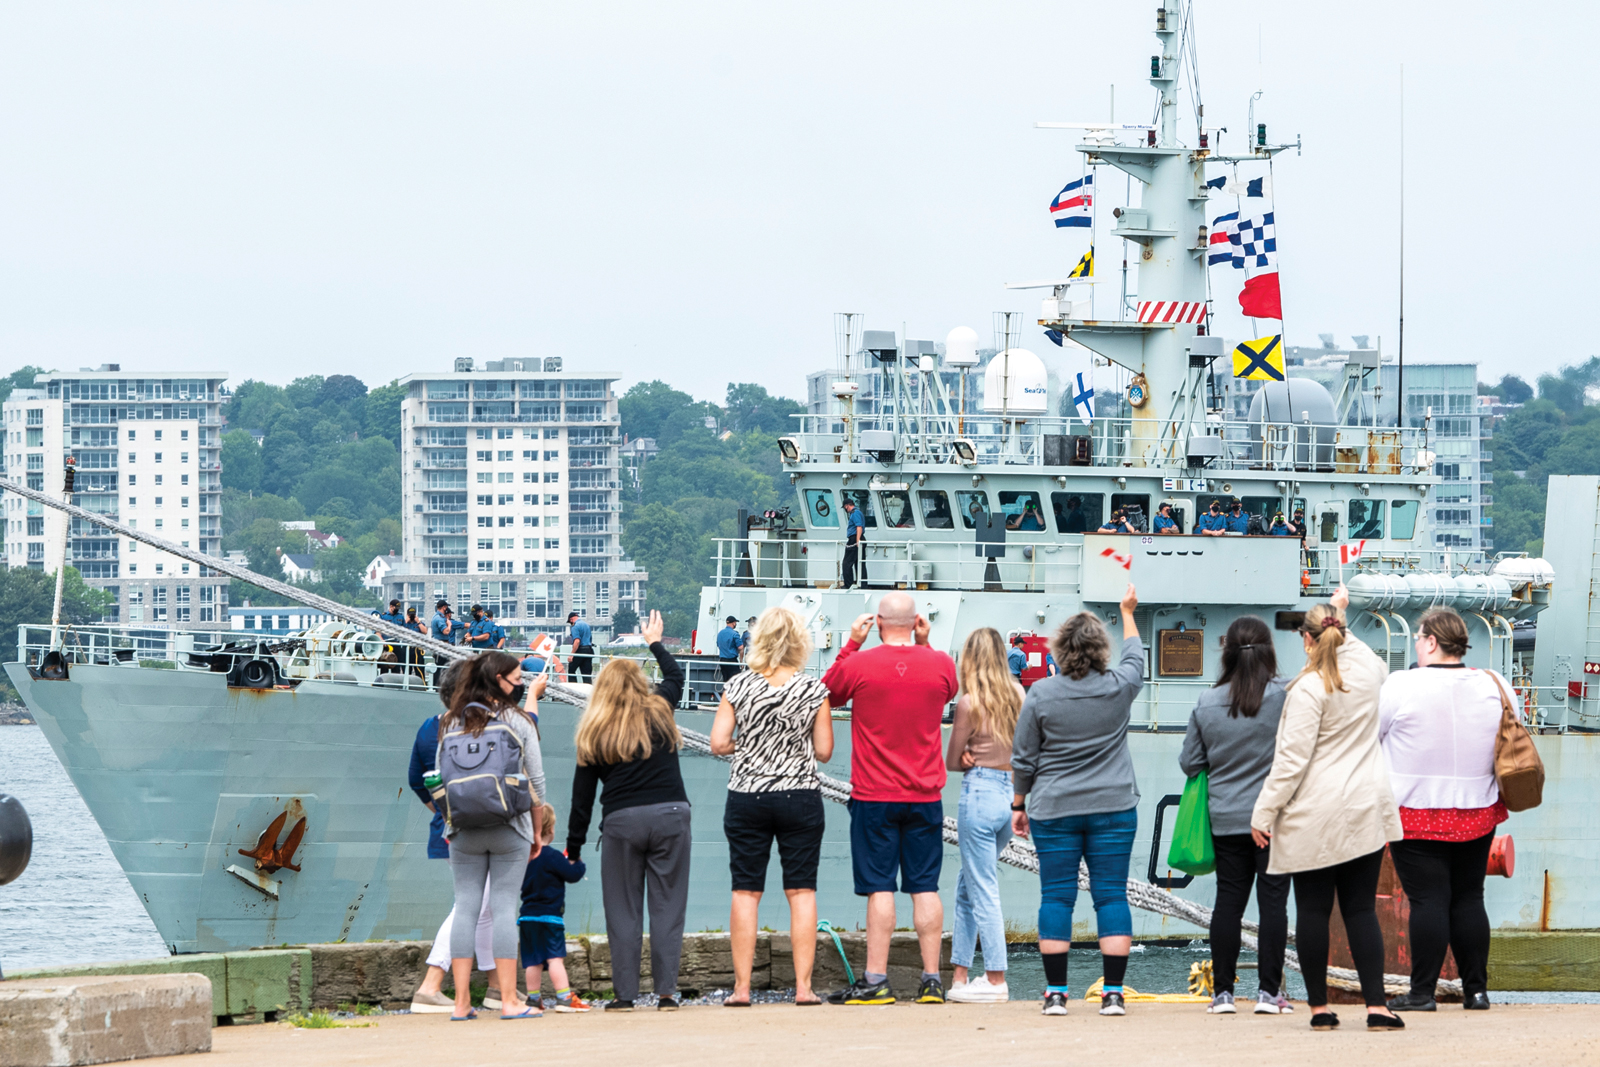 HMCS Shawinigan returned home to HMC Dockyard in Halifax on Aug. 9 after a  successful Operation Caribbe deployment. Photo: MARLANT PA